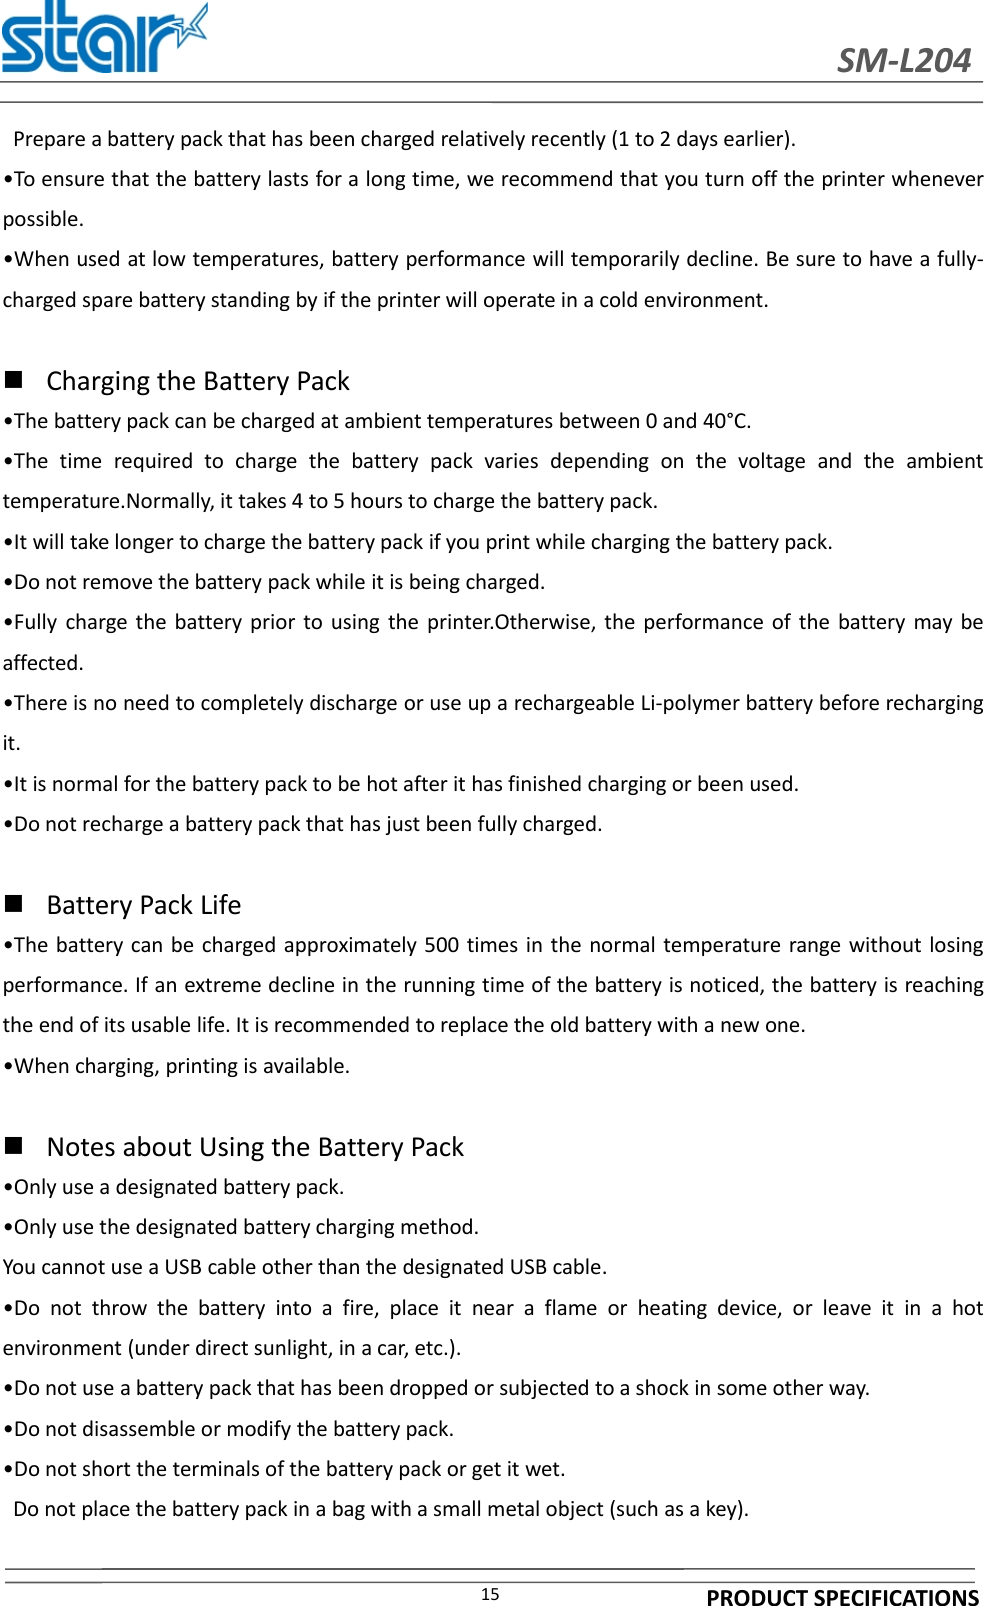 SM-L204PRODUCT SPECIFICATIONS15Prepare a battery pack that has been charged relatively recently (1 to 2 days earlier).•To ensure that the battery lasts for a long time, we recommend that you turn off the printer wheneverpossible.•When used at low temperatures, battery performance will temporarily decline. Be sure to have a fully-charged spare battery standing by if the printer will operate in a cold environment.Charging the Battery Pack•The battery pack can be charged at ambient temperatures between 0 and 40°C.•The time required to charge the battery pack varies depending on the voltage and the ambienttemperature.Normally, it takes 4 to 5 hours to charge the battery pack.•It will take longer to charge the battery pack if you print while charging the battery pack.•Do not remove the battery pack while it is being charged.•Fully charge the battery prior to using the printer.Otherwise, the performance of the battery may beaffected.•There is no need to completely discharge or use up a rechargeable Li-polymer battery before rechargingit.•It is normal for the battery pack to be hot after it has finished charging or been used.•Do not recharge a battery pack that has just been fully charged.Battery Pack Life•The battery can be charged approximately 500 times in the normal temperature range without losingperformance. If an extreme decline in the running time of the battery is noticed, the battery is reachingthe end of its usable life. It is recommended to replace the old battery with a new one.•When charging, printing is available.Notes about Using the Battery Pack•Only use a designated battery pack.•Only use the designated battery charging method.You cannot use a USB cable other than the designated USB cable.•Do not throw the battery into a fire, place it near a flame or heating device, or leave it in a hotenvironment (under direct sunlight, in a car, etc.).•Do not use a battery pack that has been dropped or subjected to a shock in some other way.•Do not disassemble or modify the battery pack.•Do not short the terminals of the battery pack or get it wet.Do not place the battery pack in a bag with a small metal object (such as a key).